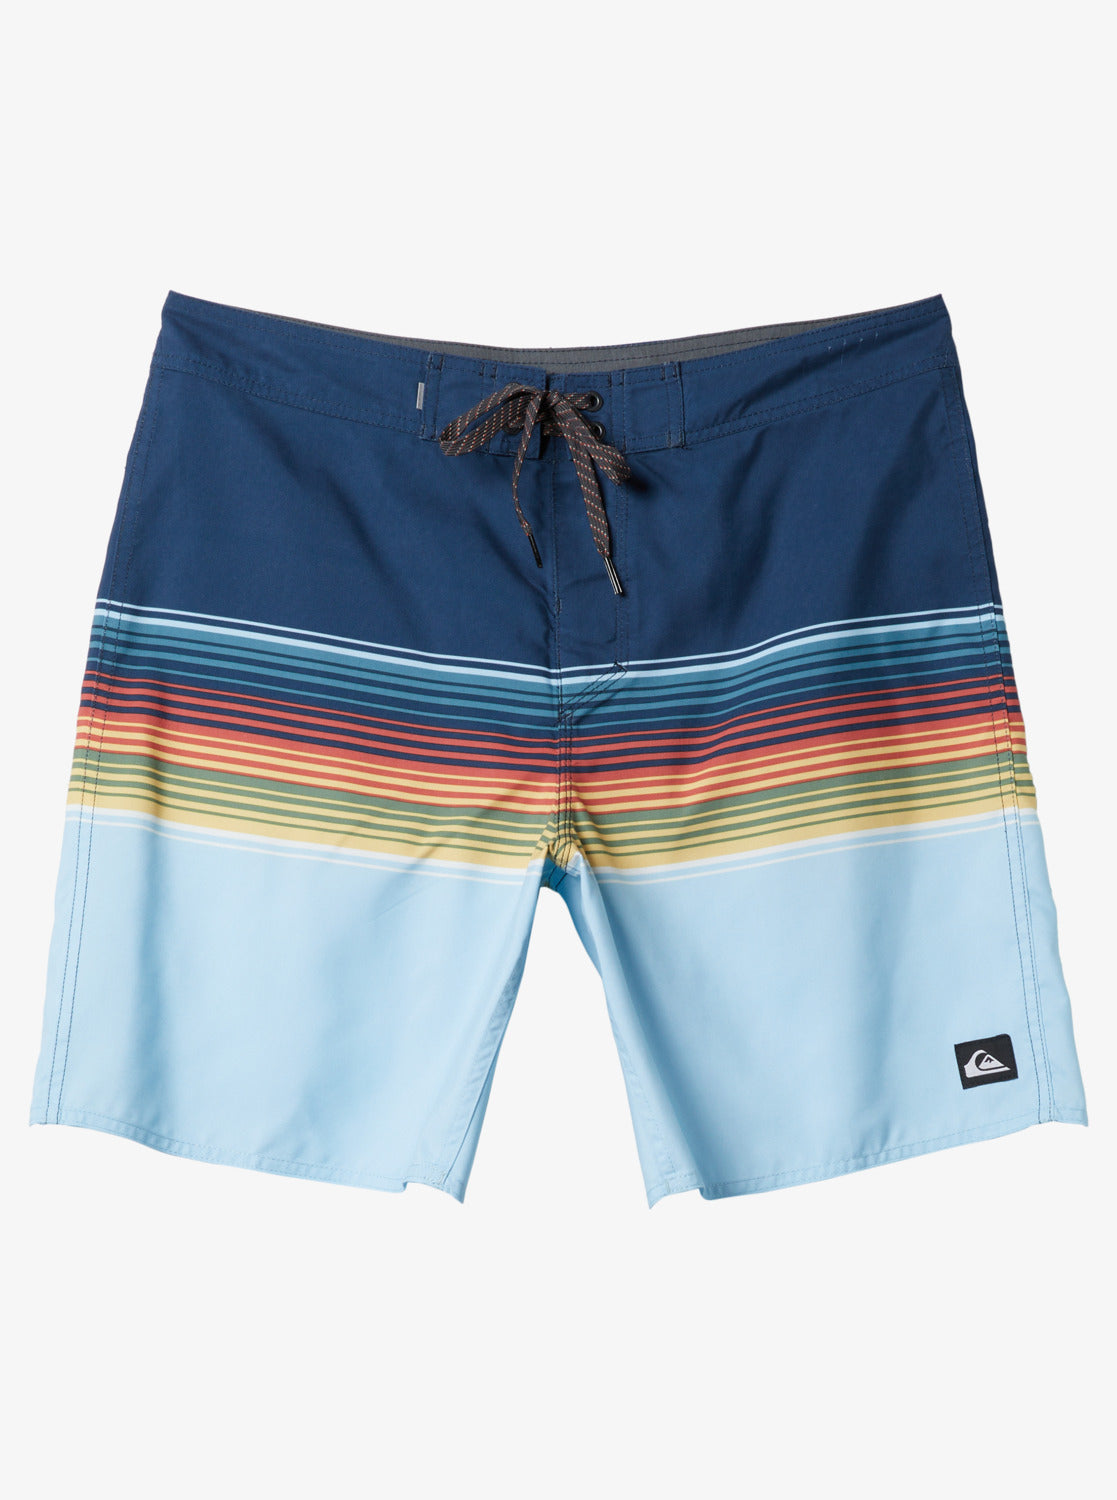 Quiksilver Everyday Swell Vision 18 Boardshort - Midnight Navy